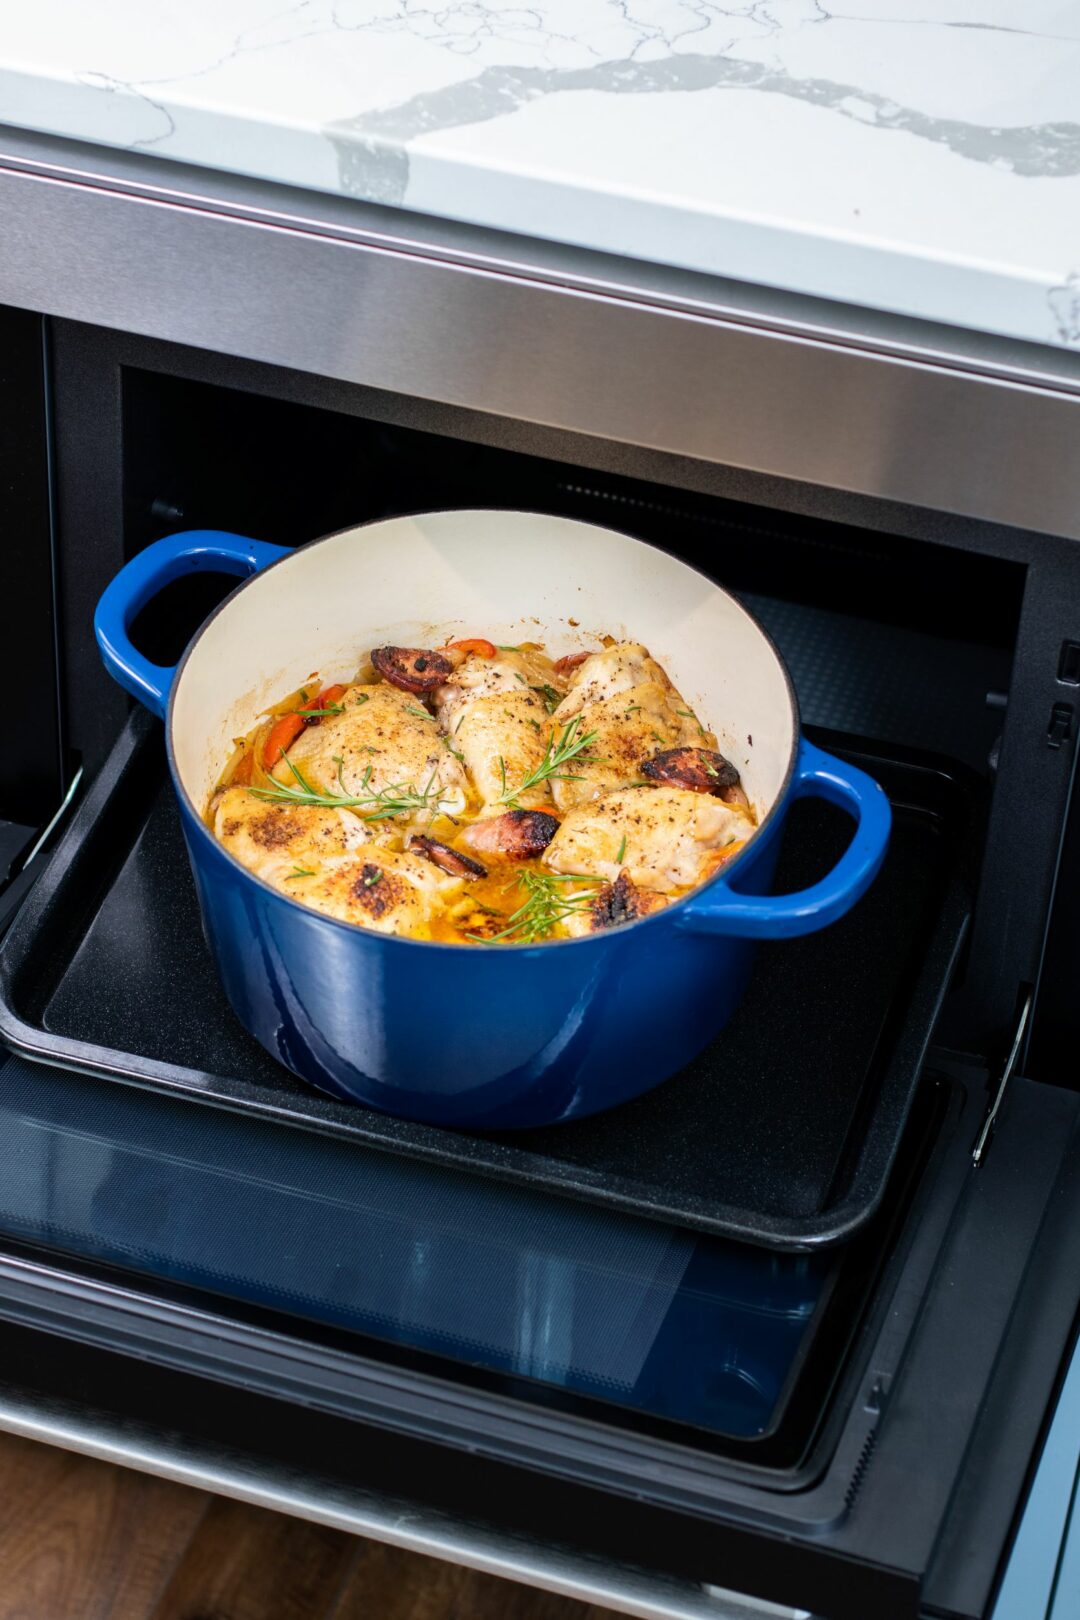 Dutch Oven in a Sharp Built-In SuperSteam Oven